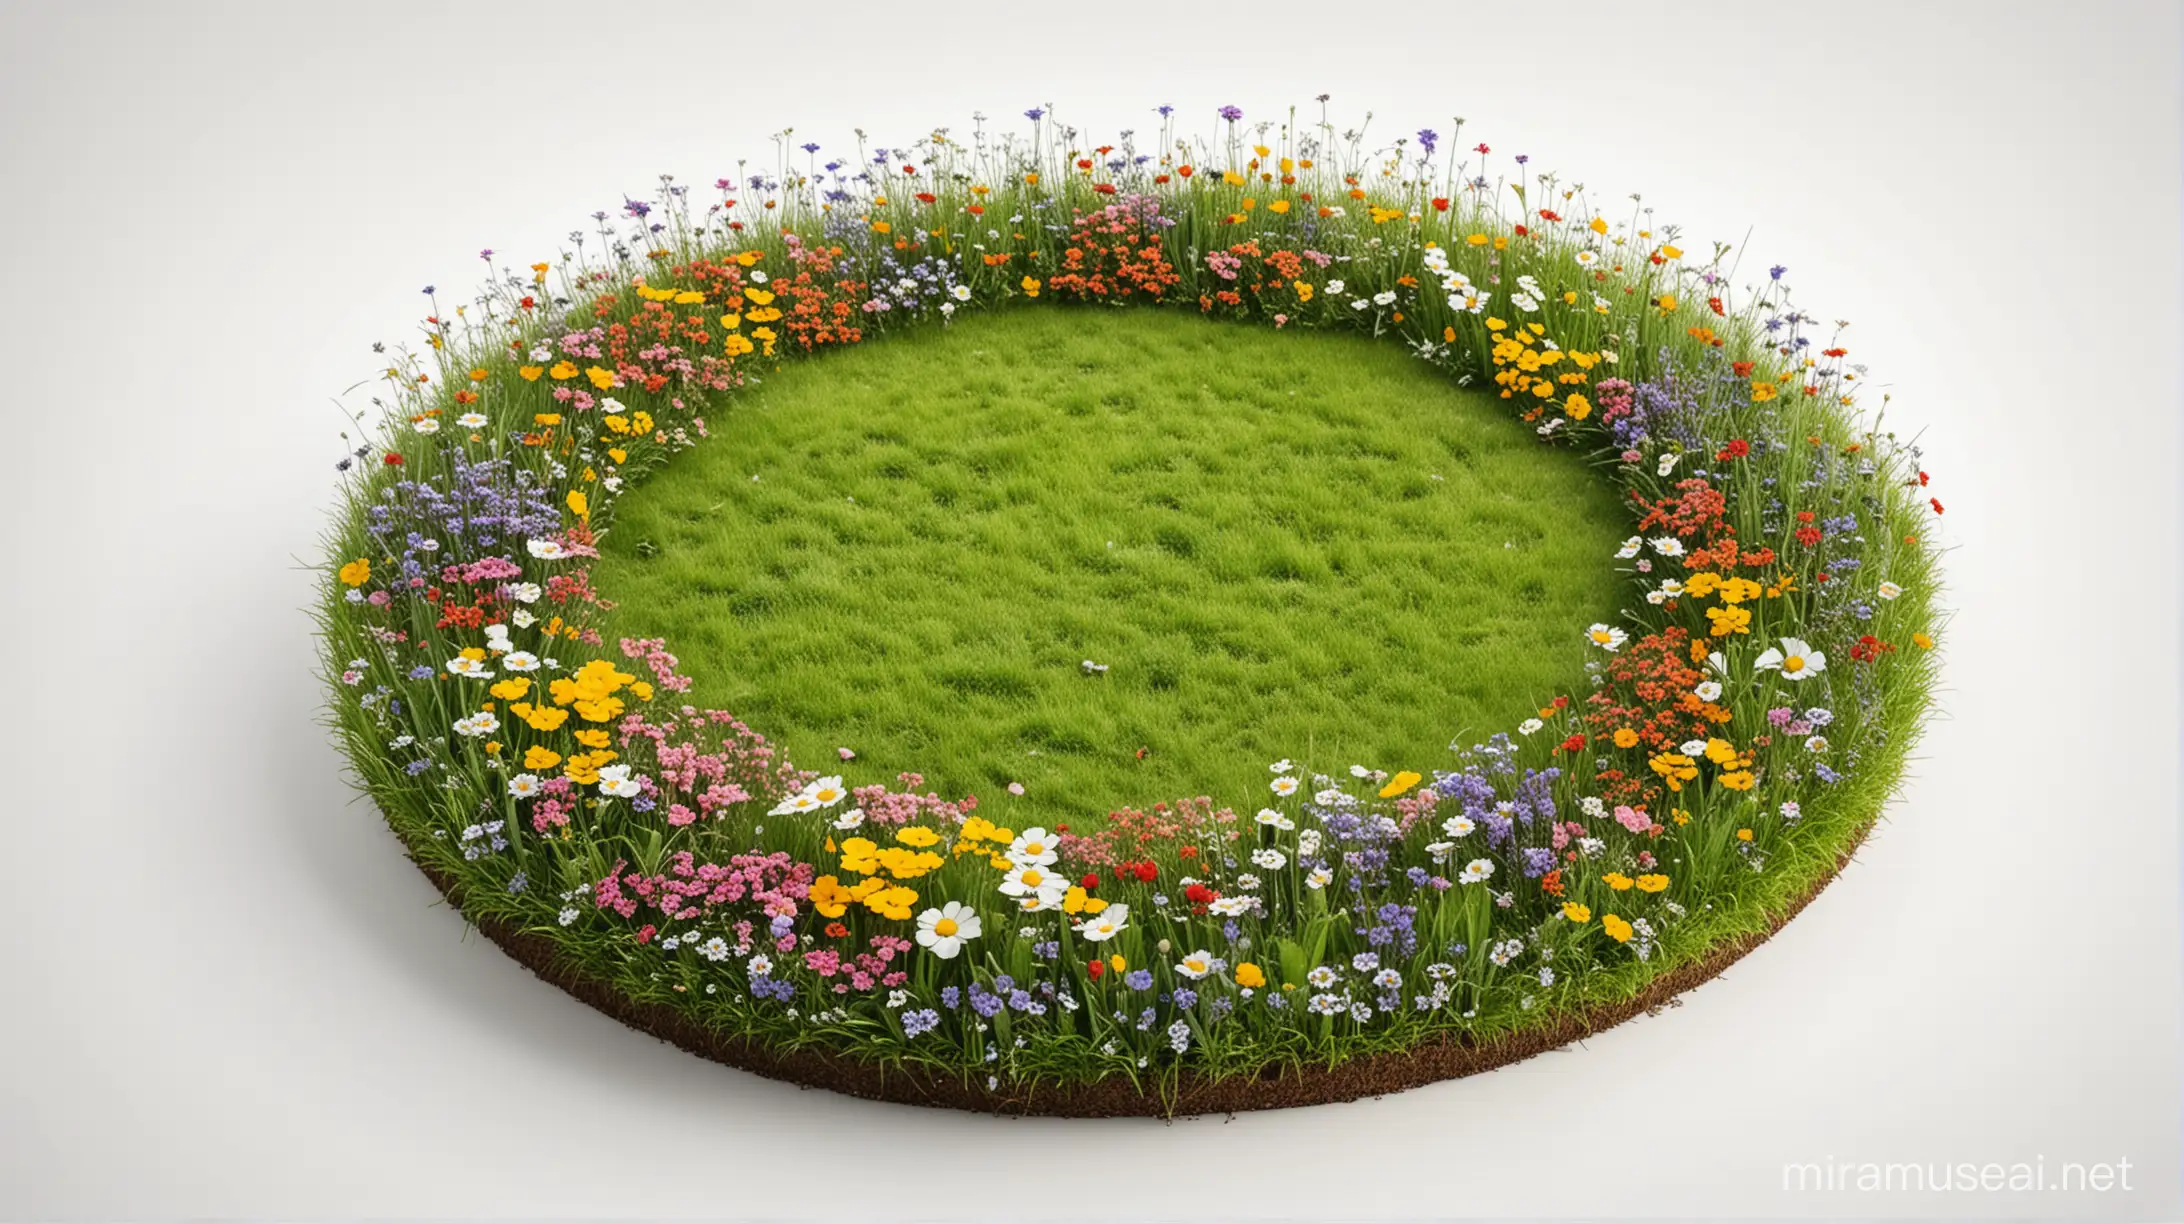 Circular Garden with Vibrant Flowers and Green Grass on White Background